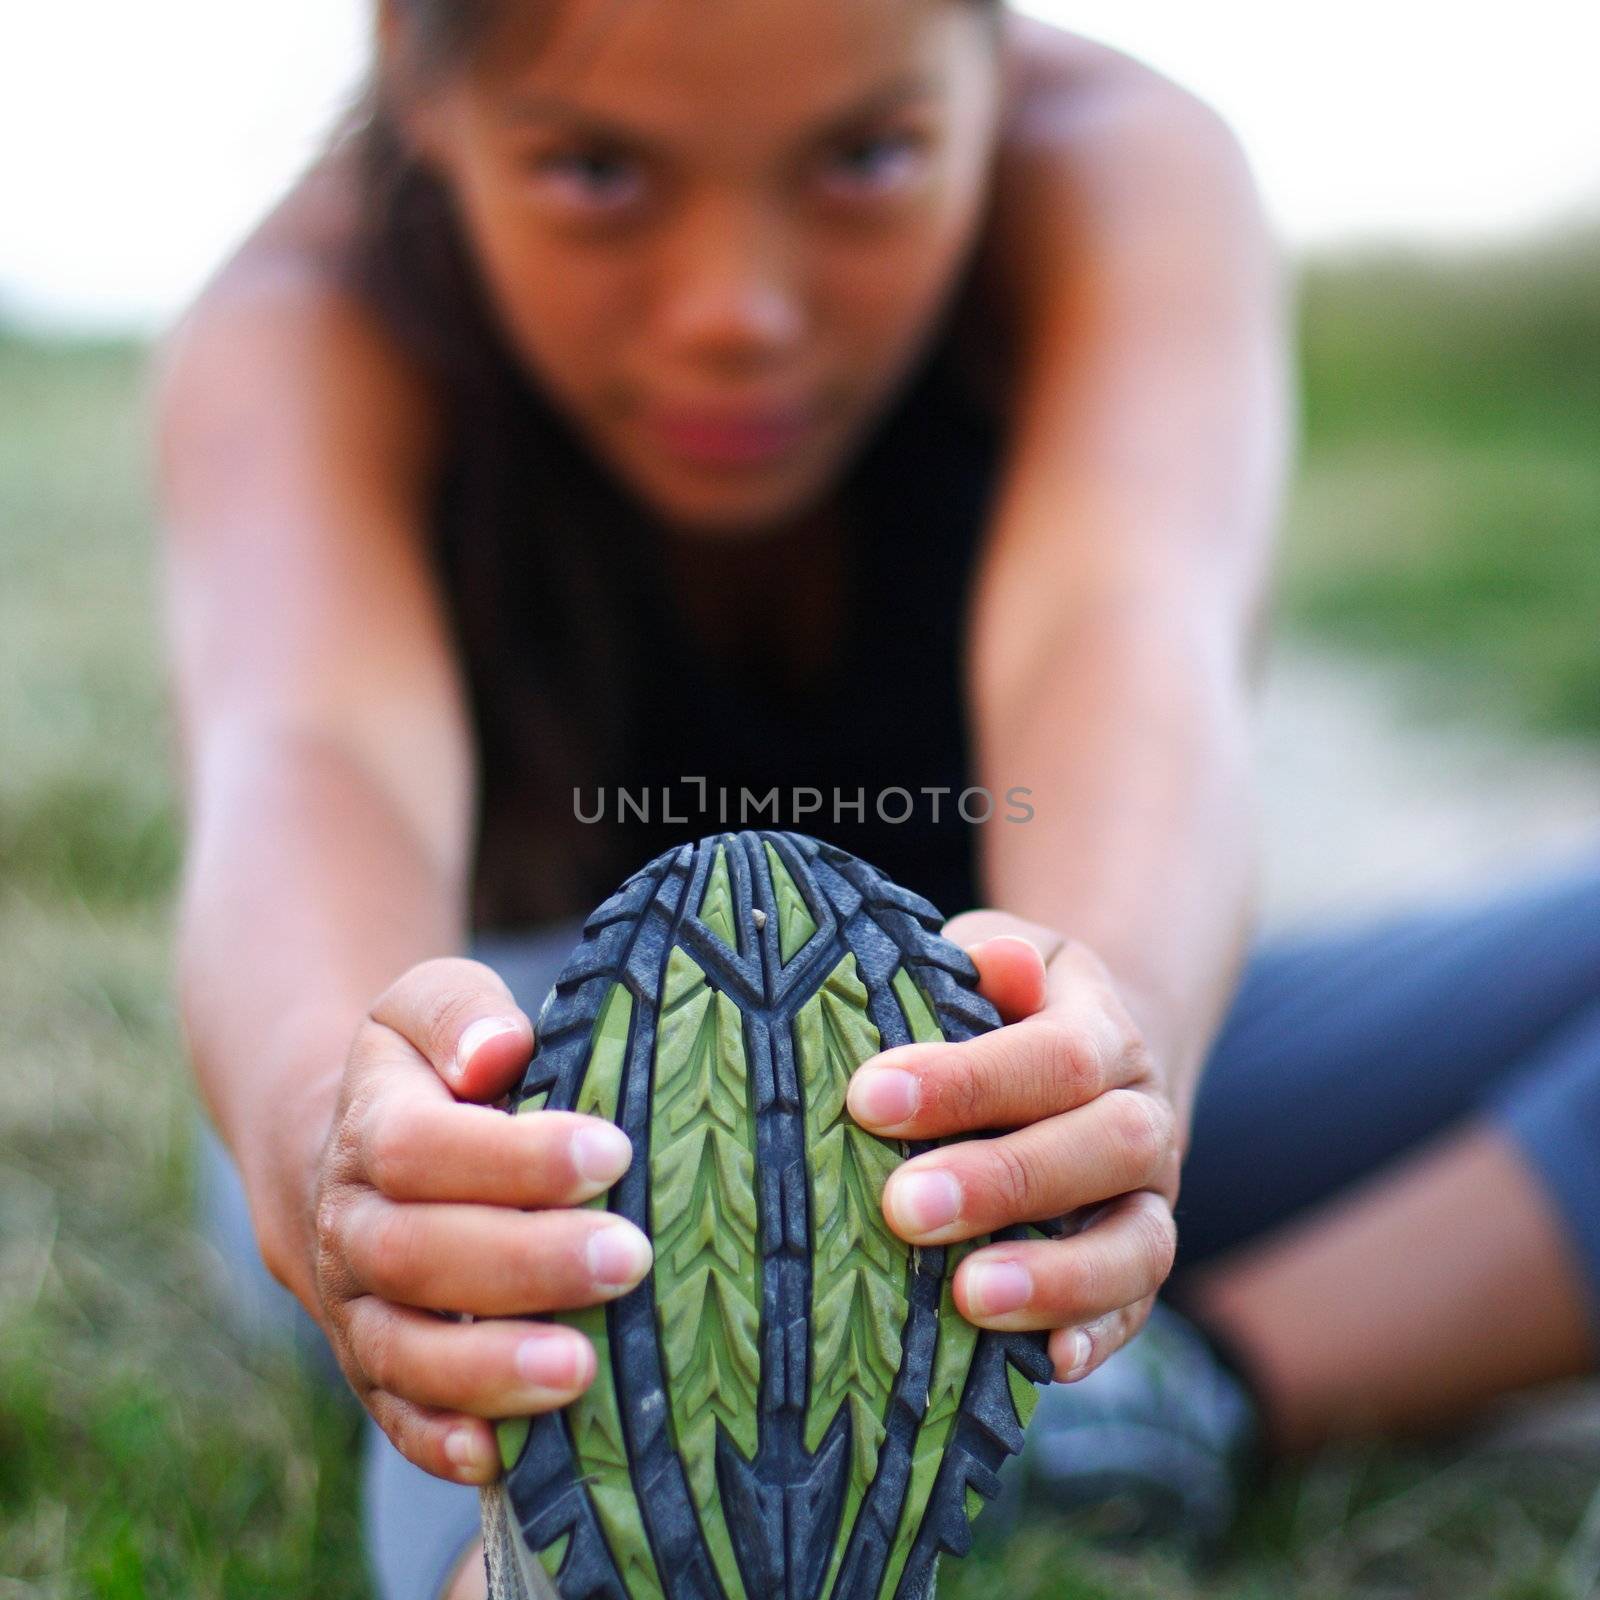 Woman stretching out during outdoor exercise in the fall. Shallow depth of field, focus on shoe.